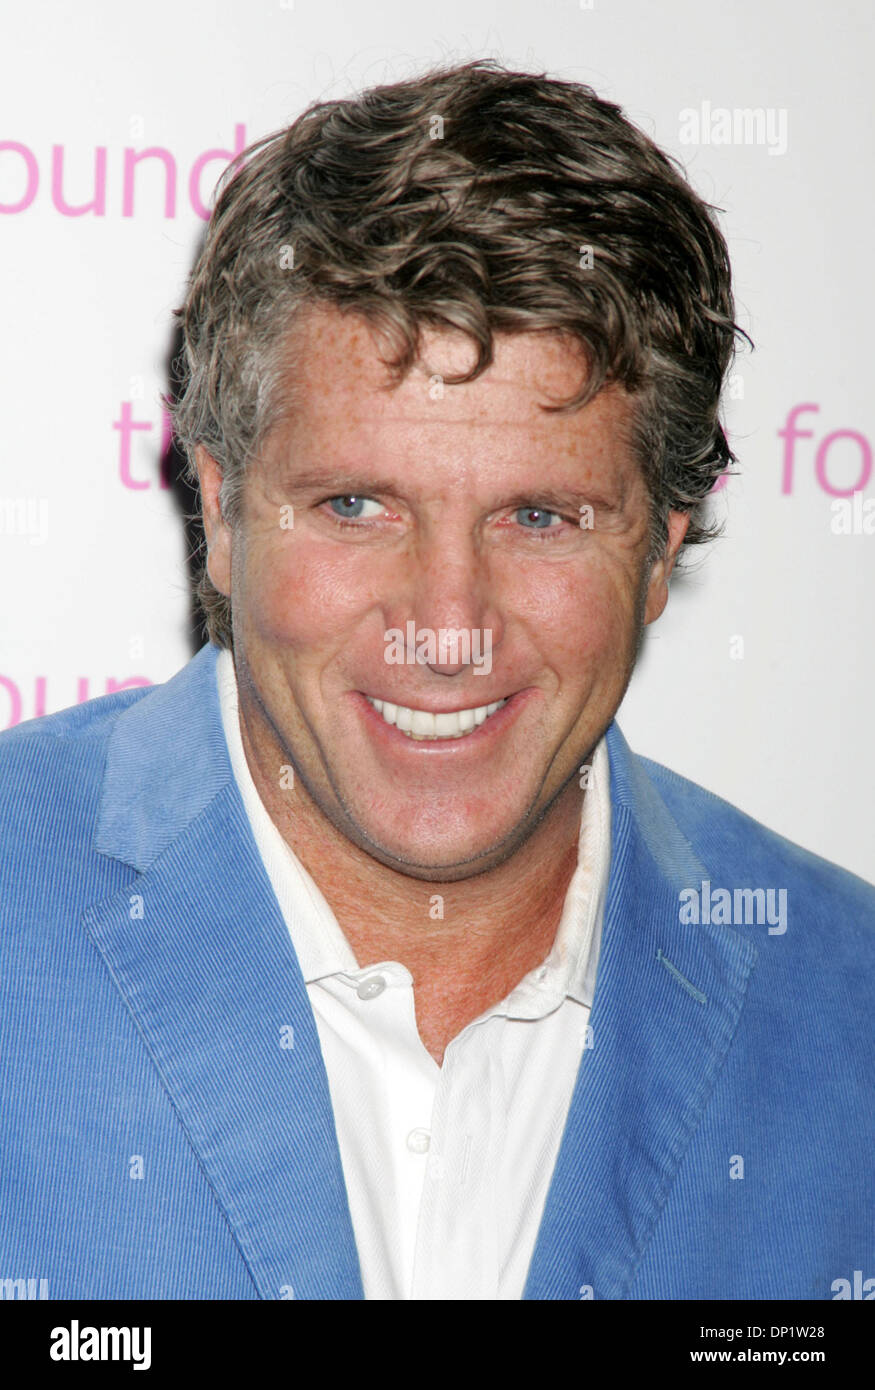 May 09, 2006; New York, NY, USA; DONNY DEUTSCH at the arrivals for the 3rd annual Candie's Foundation 'Event to Prevent' teen pregnancy gala held at Gotham Hall. Mandatory Credit: Photo by Nancy Kaszerman/ZUMA Press. (©) Copyright 2006 by Nancy Kaszerman Stock Photo